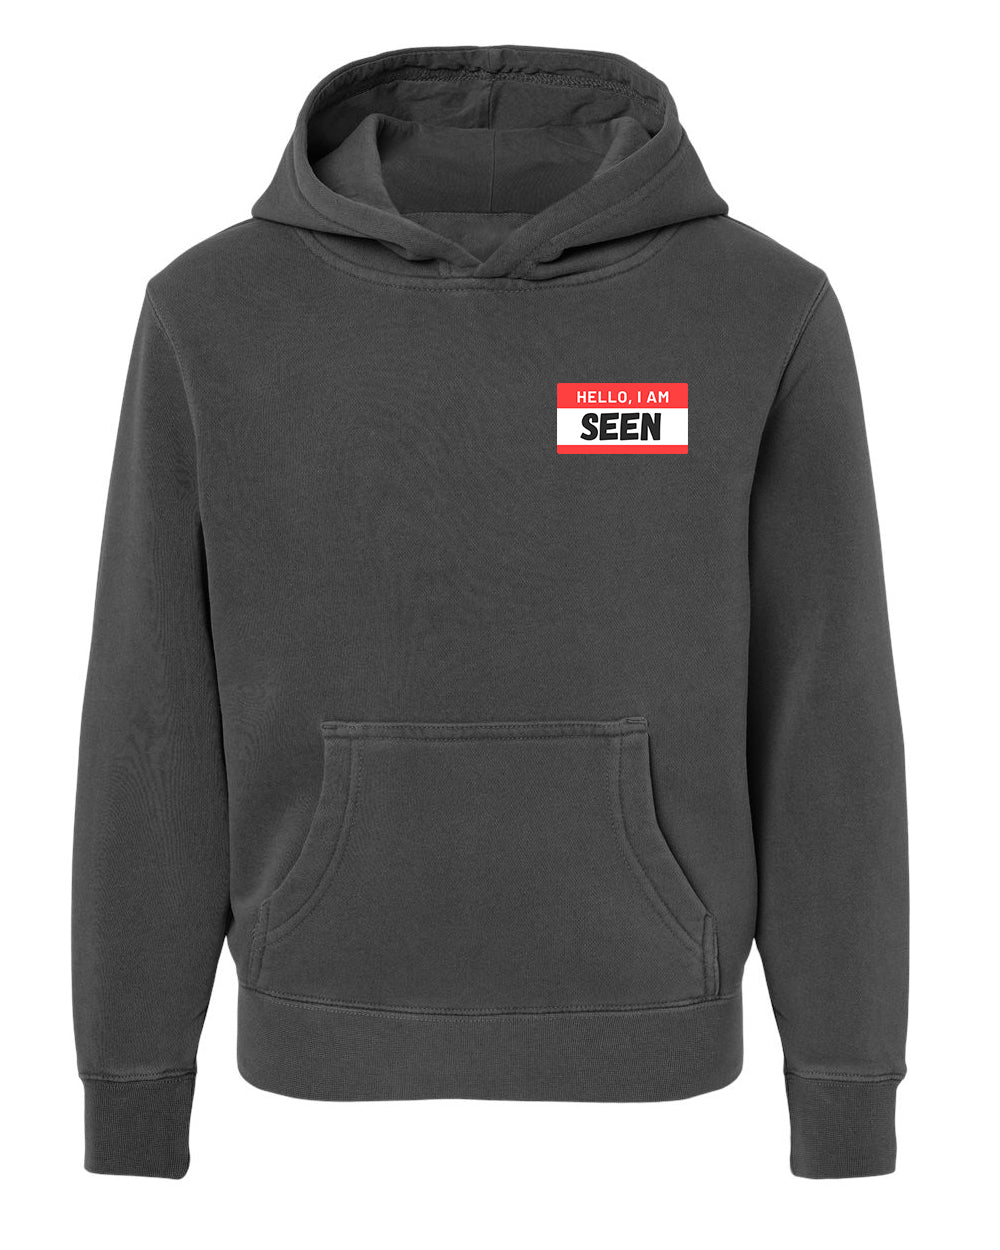 I Am Seen Youth Hoodie by Seen Not Seen